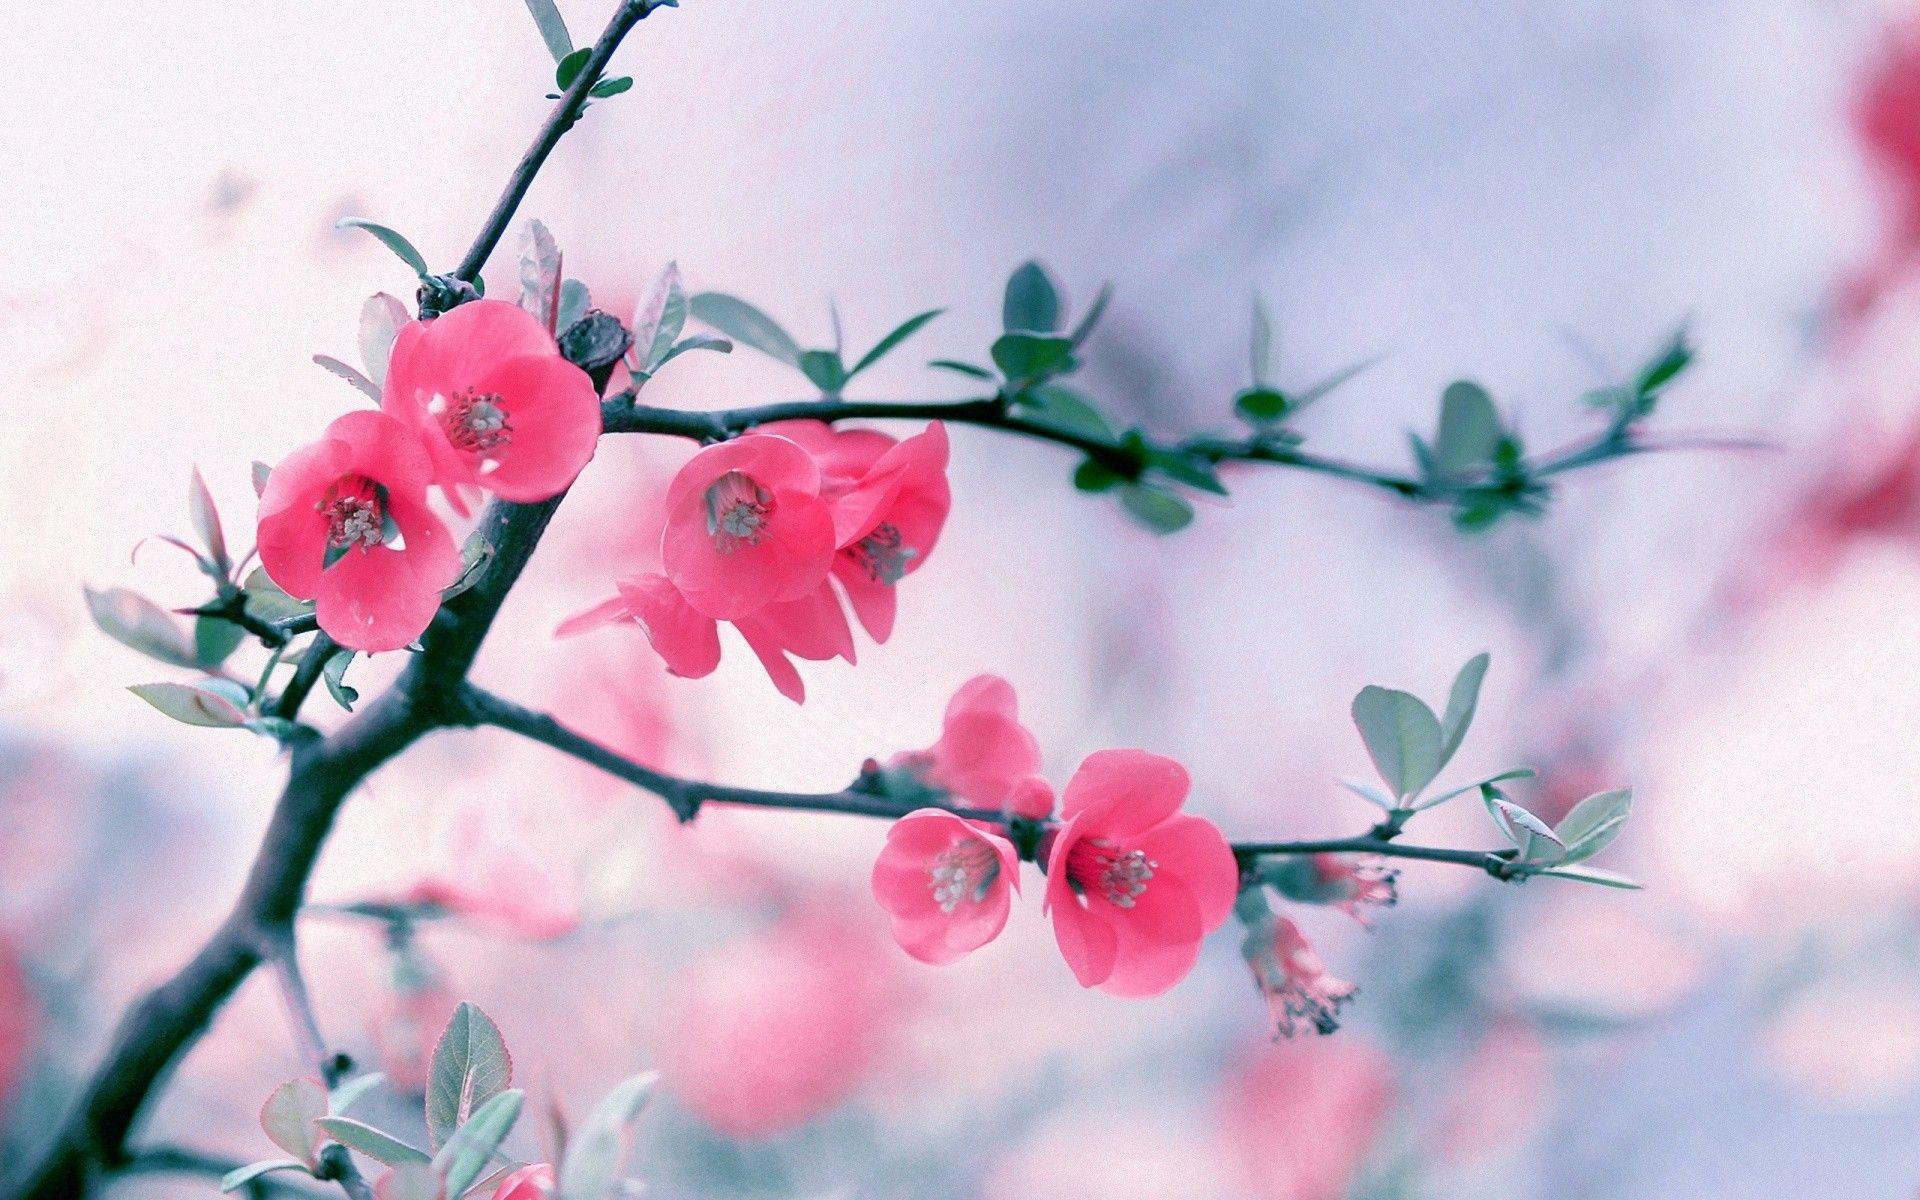 Cool Flower Wallpapers Wallpapers